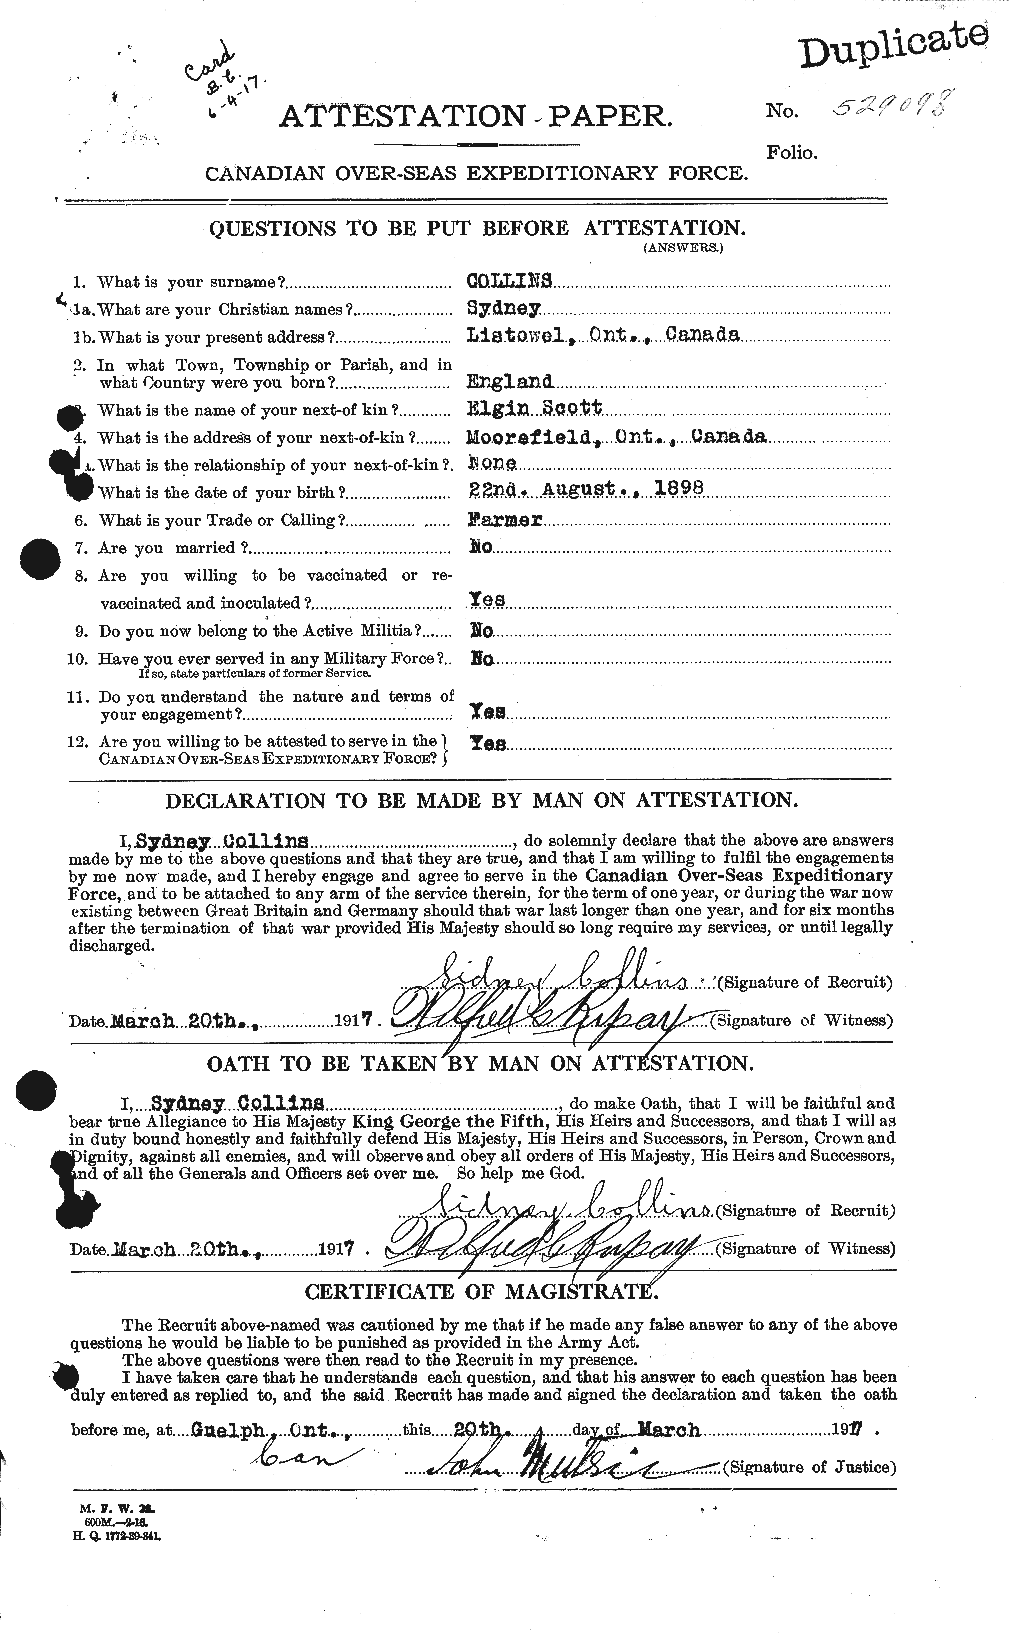 Personnel Records of the First World War - CEF 069148a